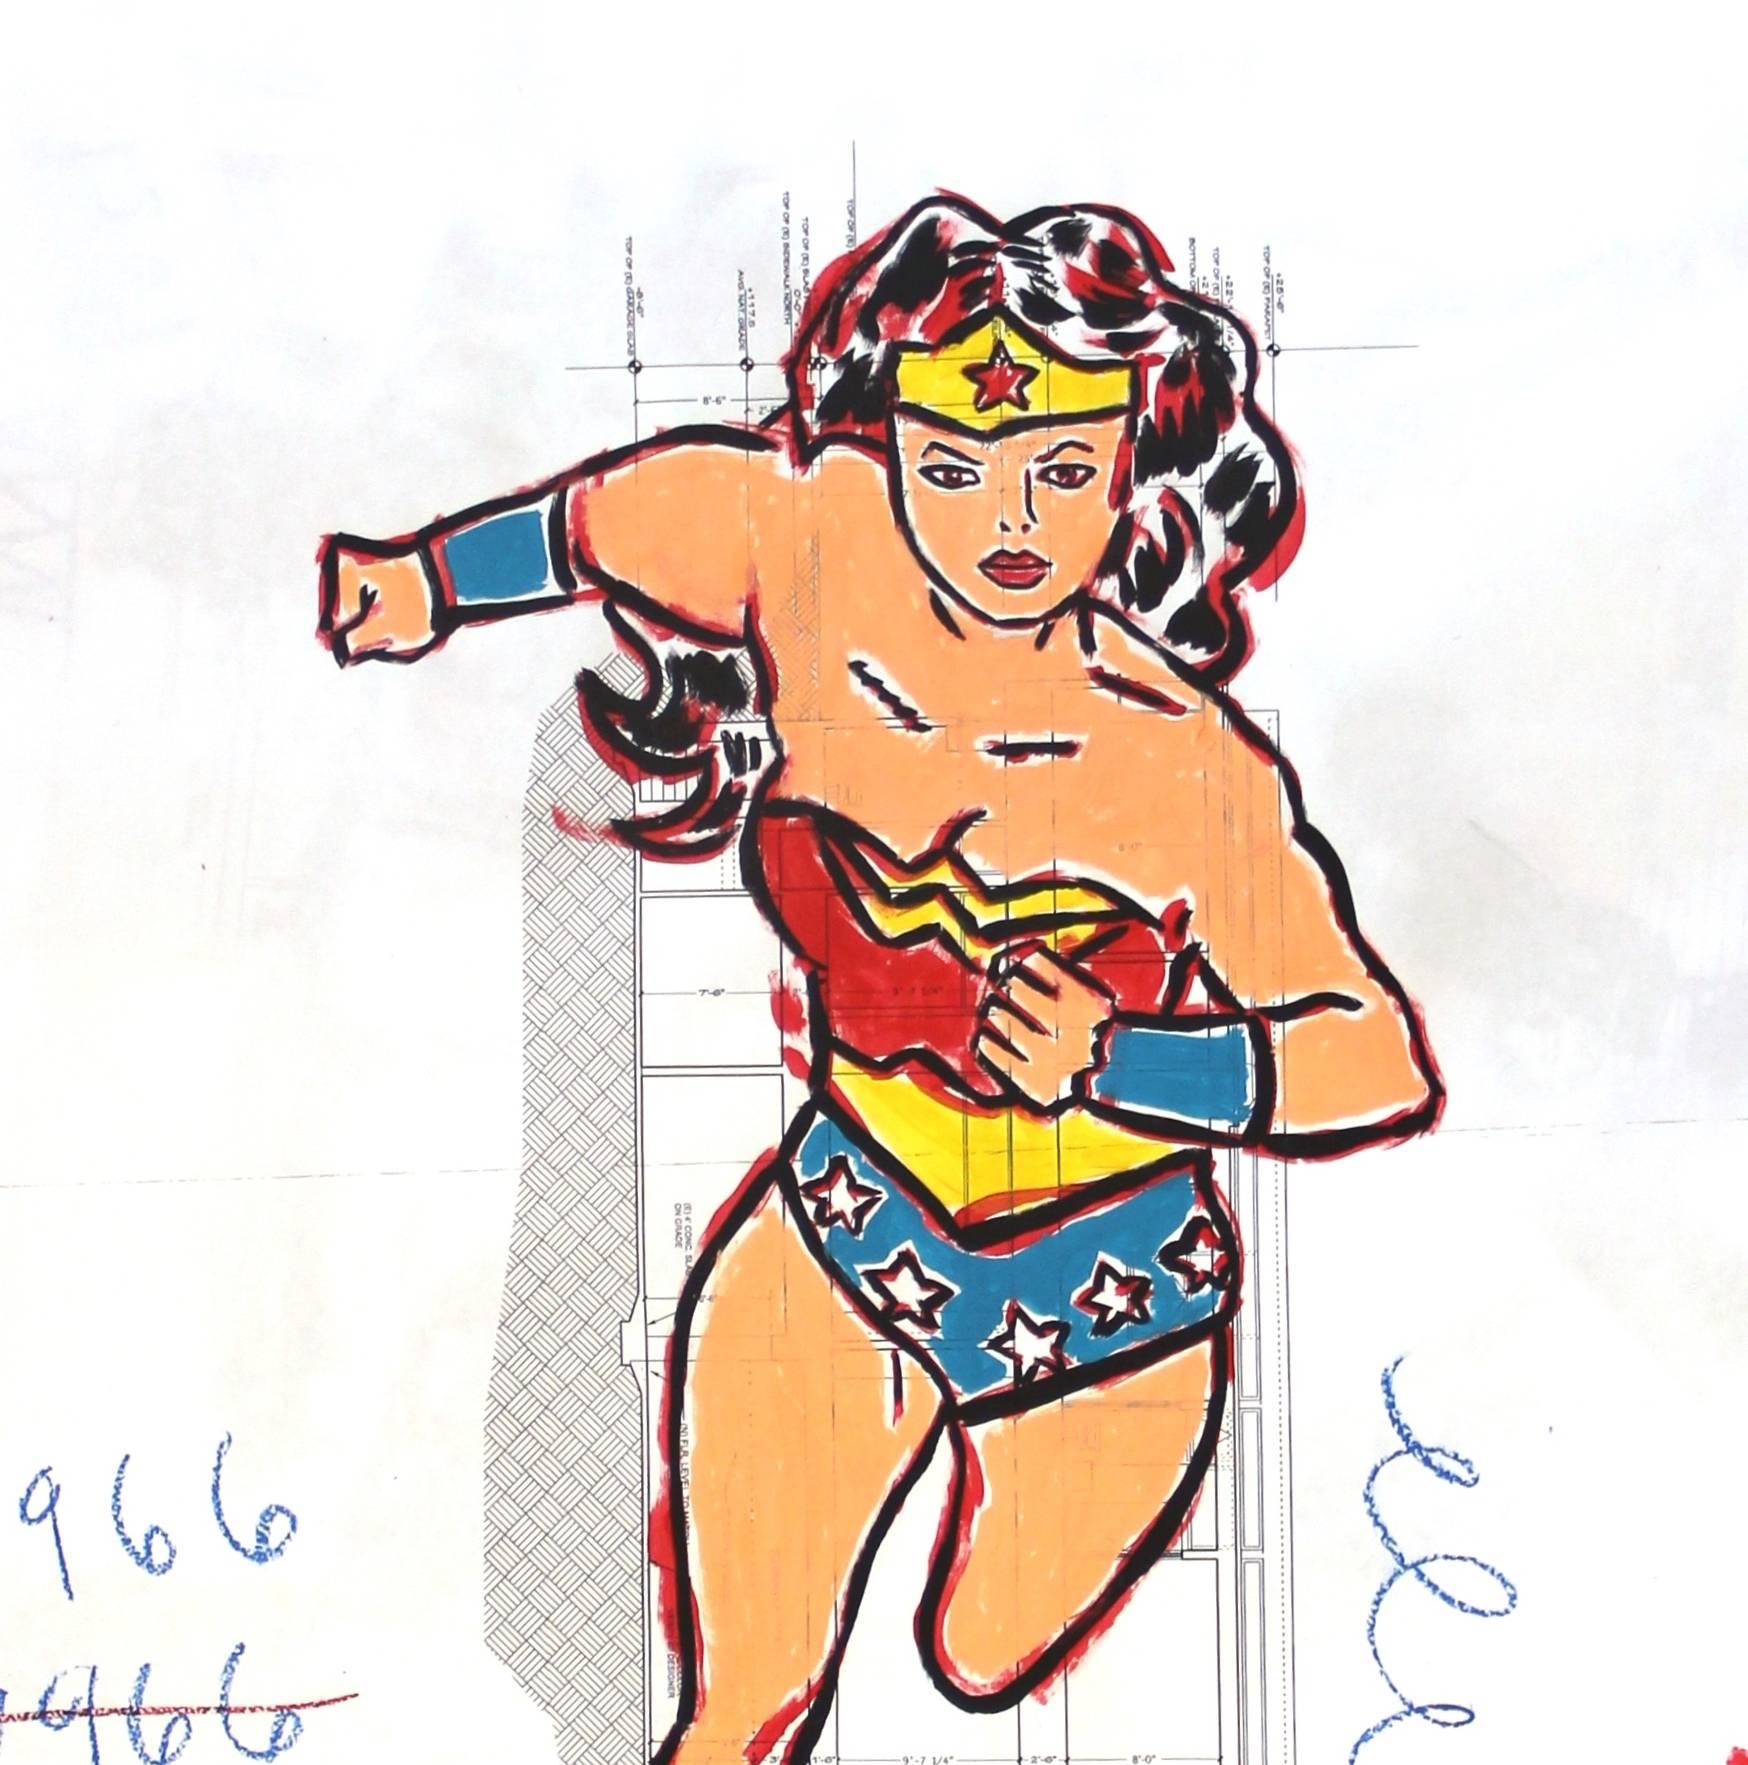 Go Wonder Woman! - Large Mixed Media Artwork on Architectural Paper 1